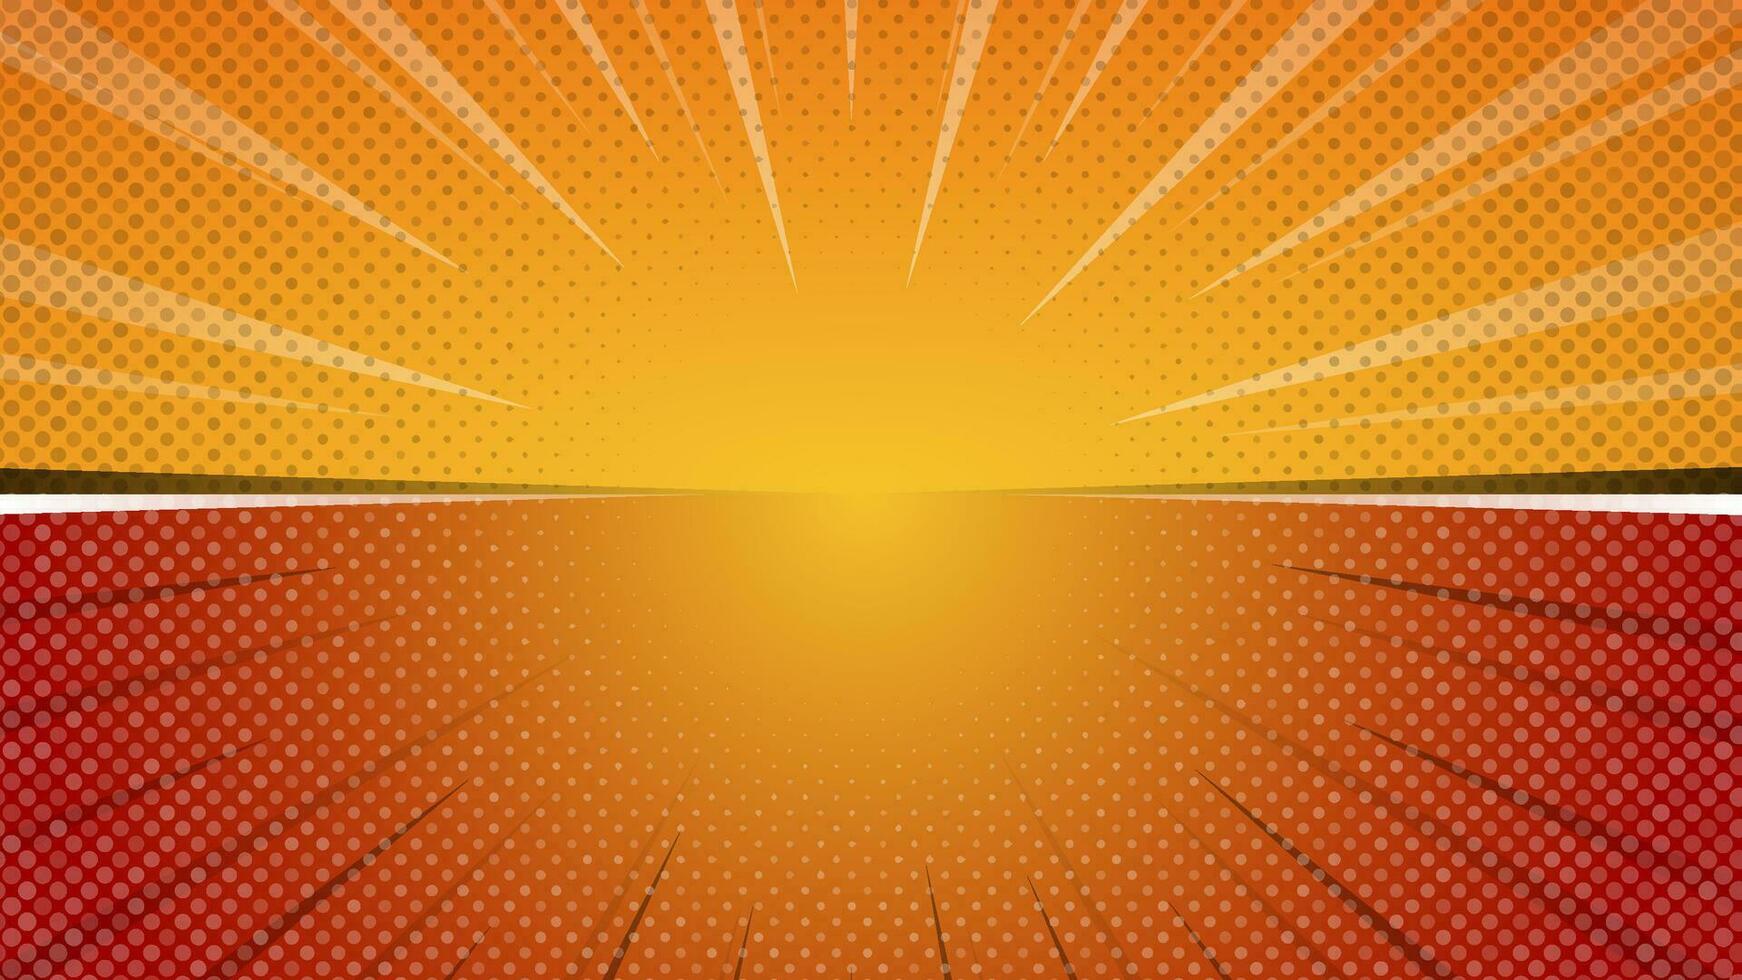 Comic book orange background with rays and halftone dots. Sunburst background illustration for your design. vector